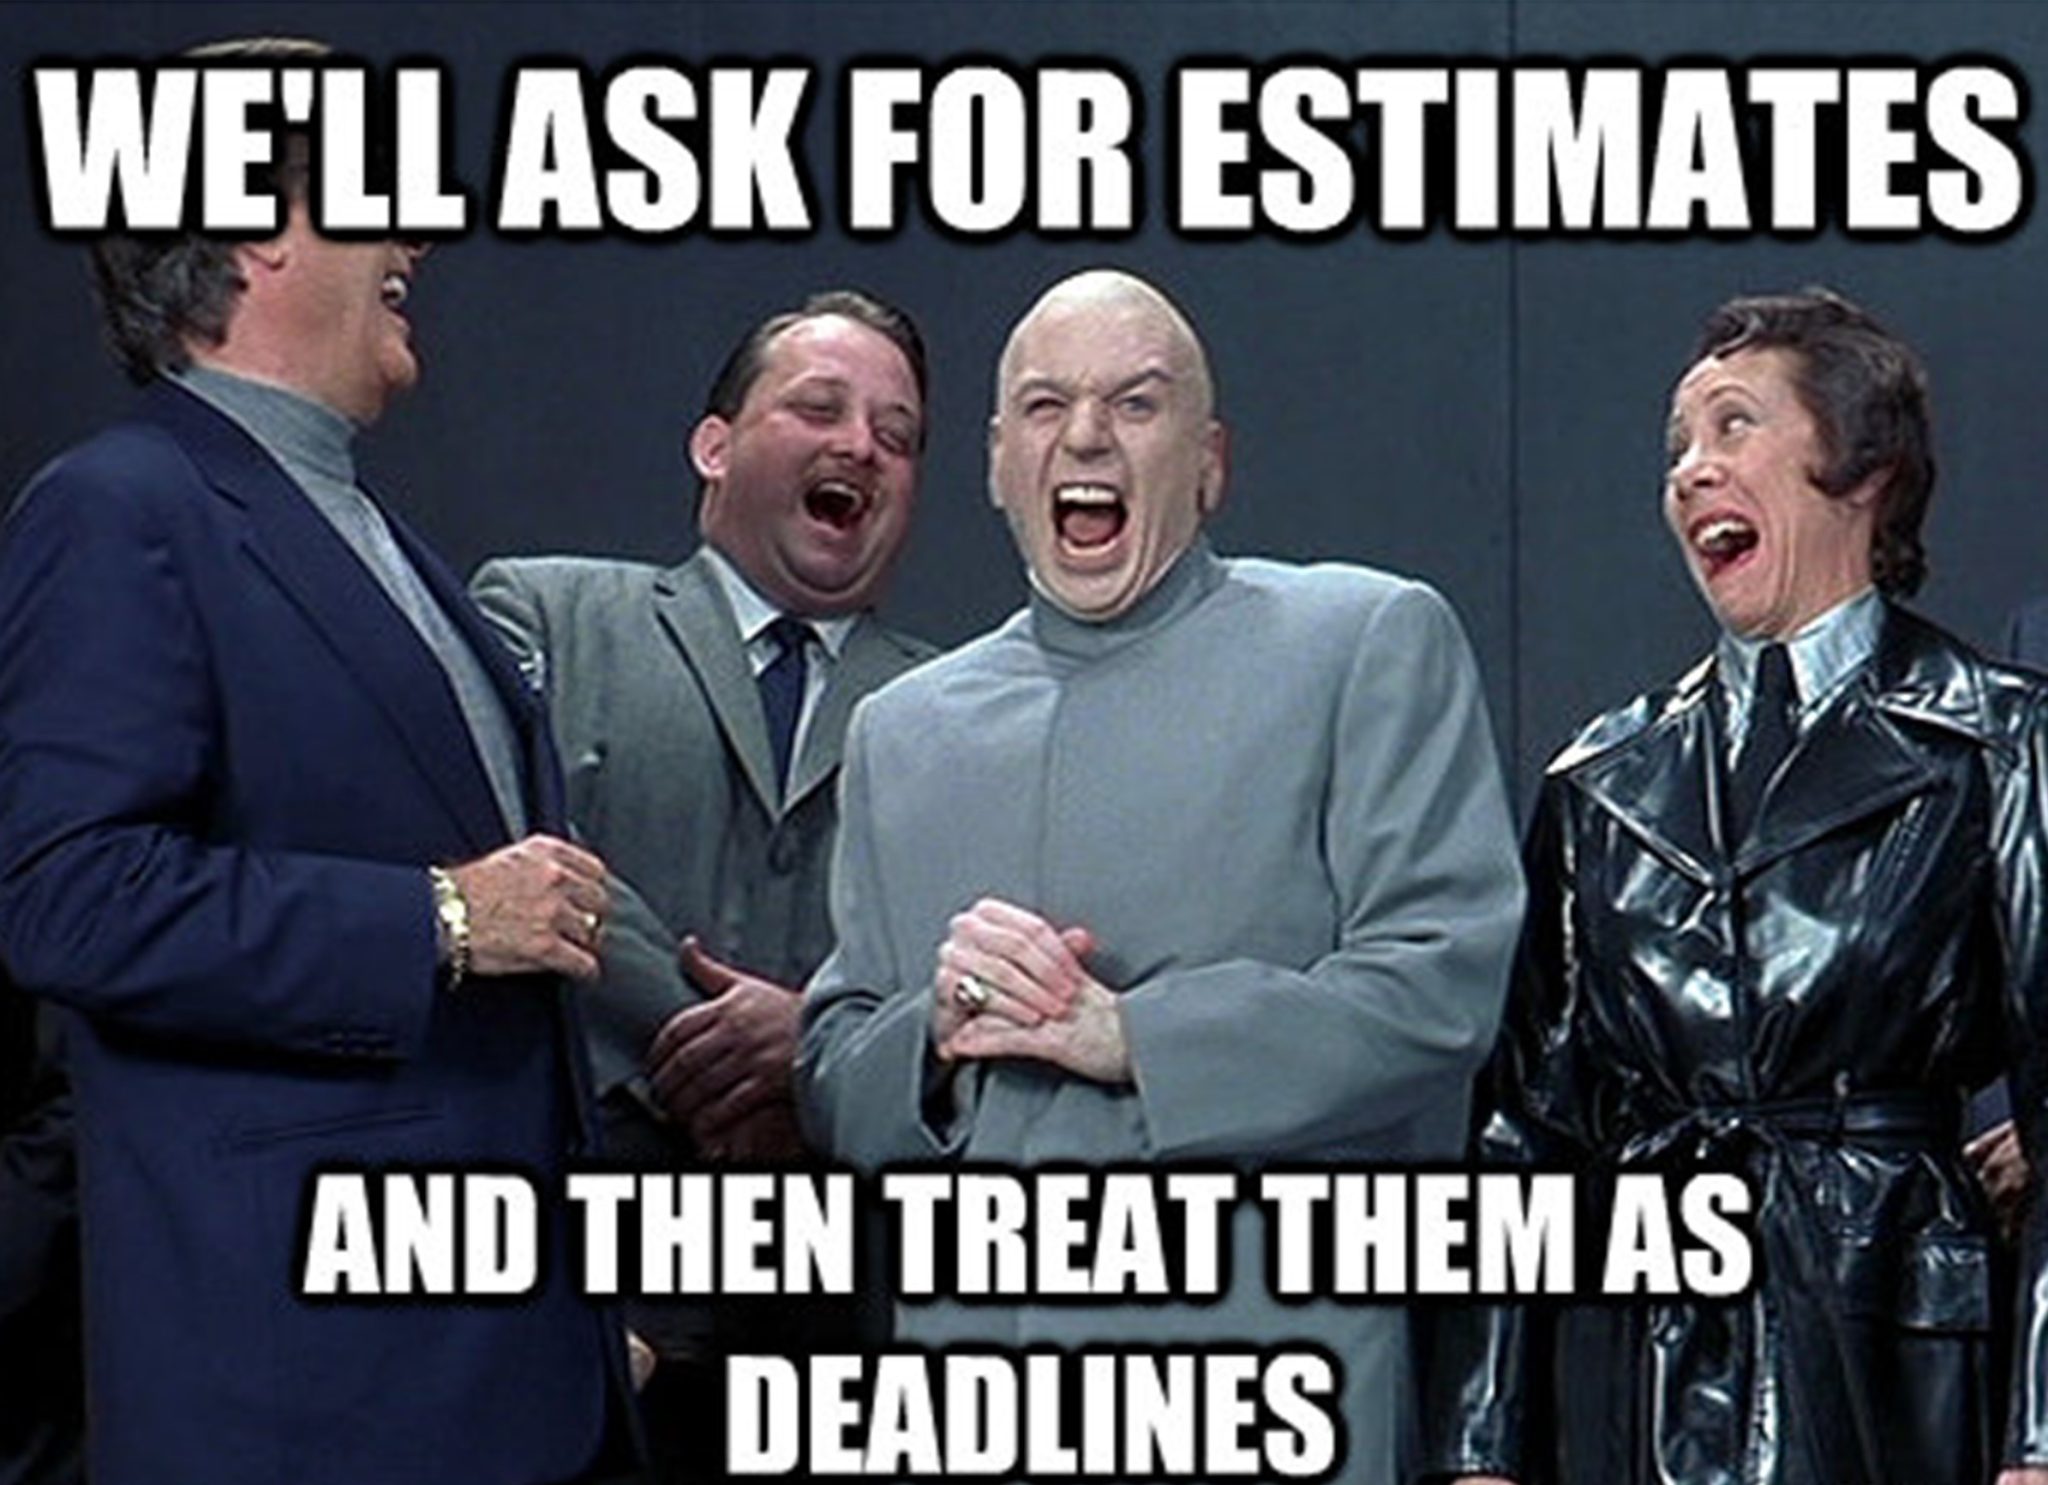 “We’ll ask for estimates and then treat them as deadlines!”